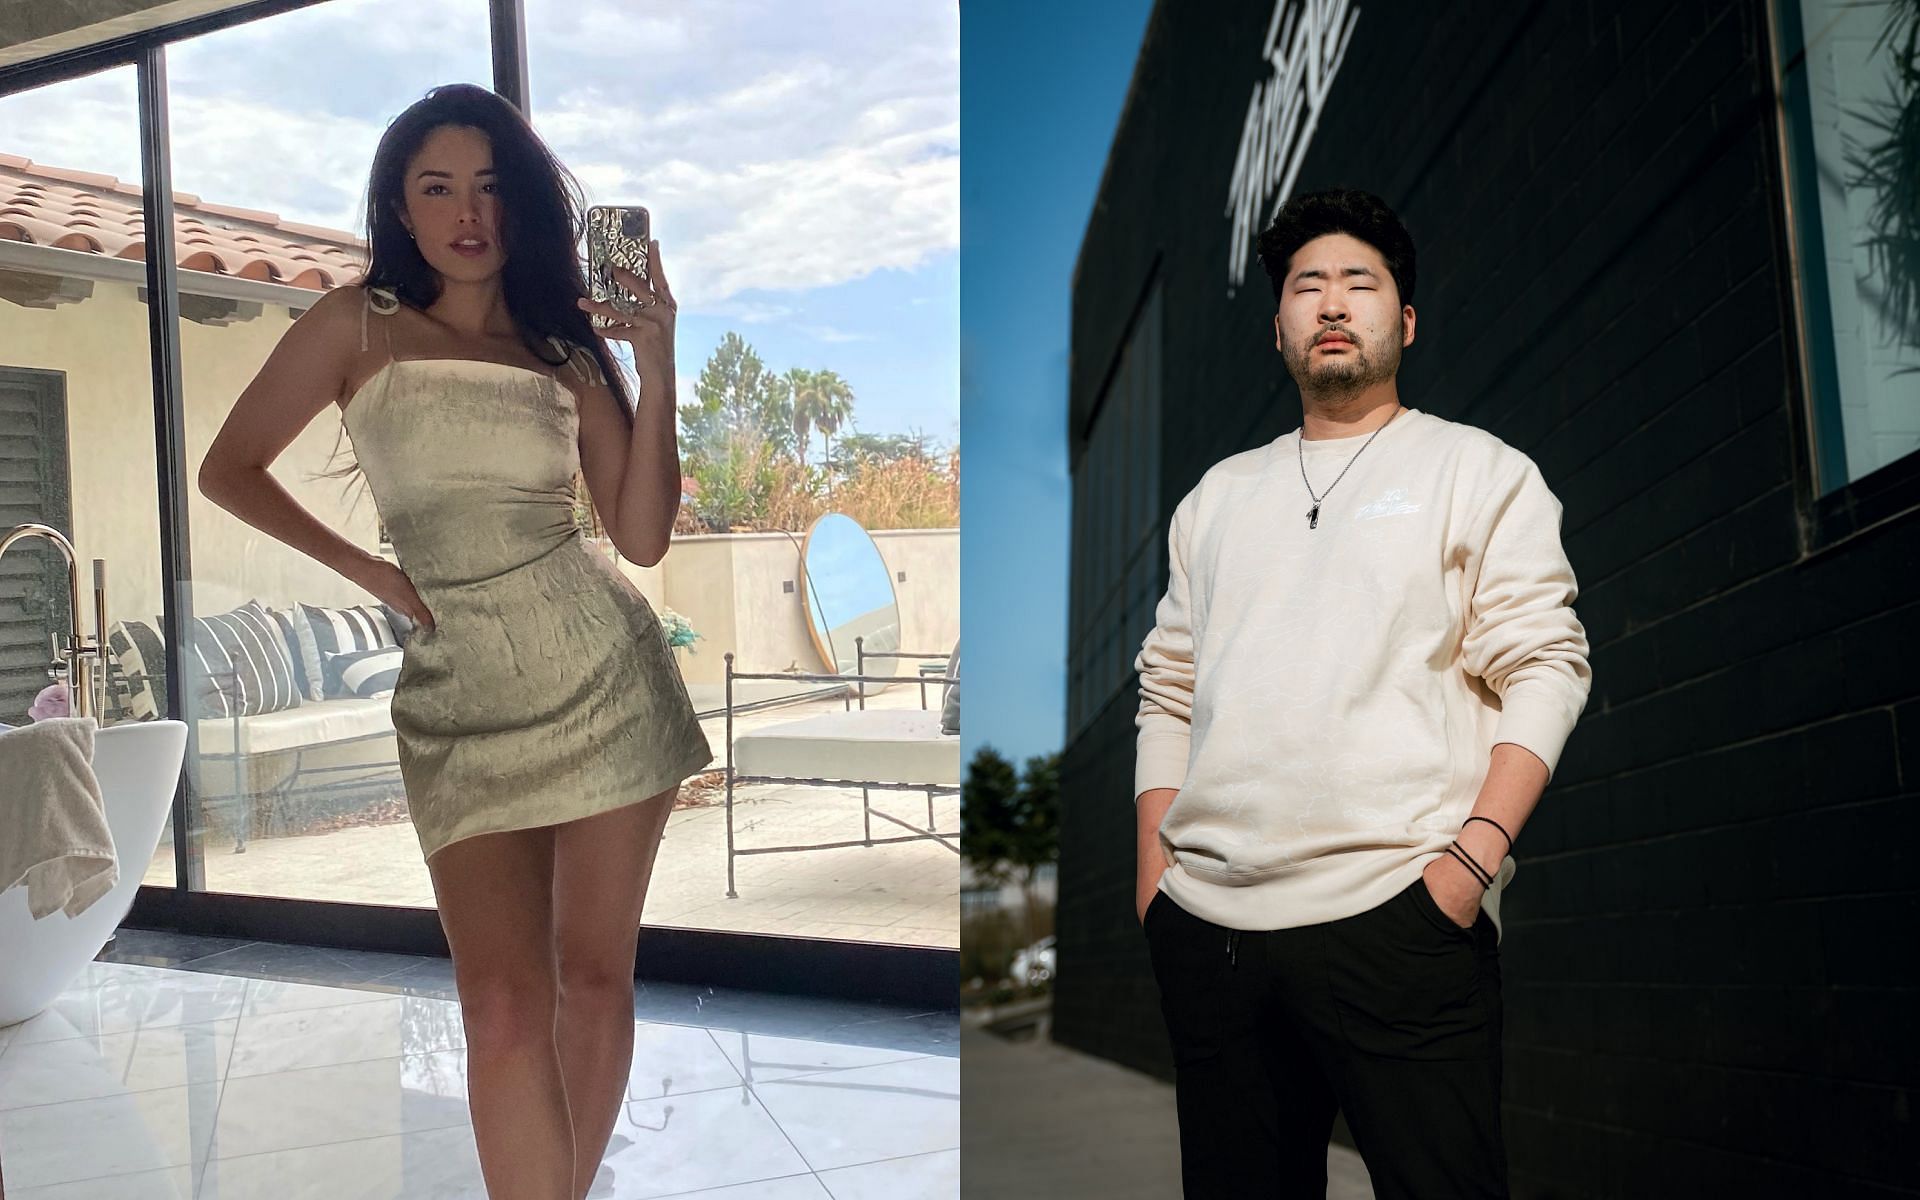 Peter Park realizes that Valkyrae is his &quot;boss&quot; at 100 Thieves (Images via Valkyrae and Peter Park/Twitter)